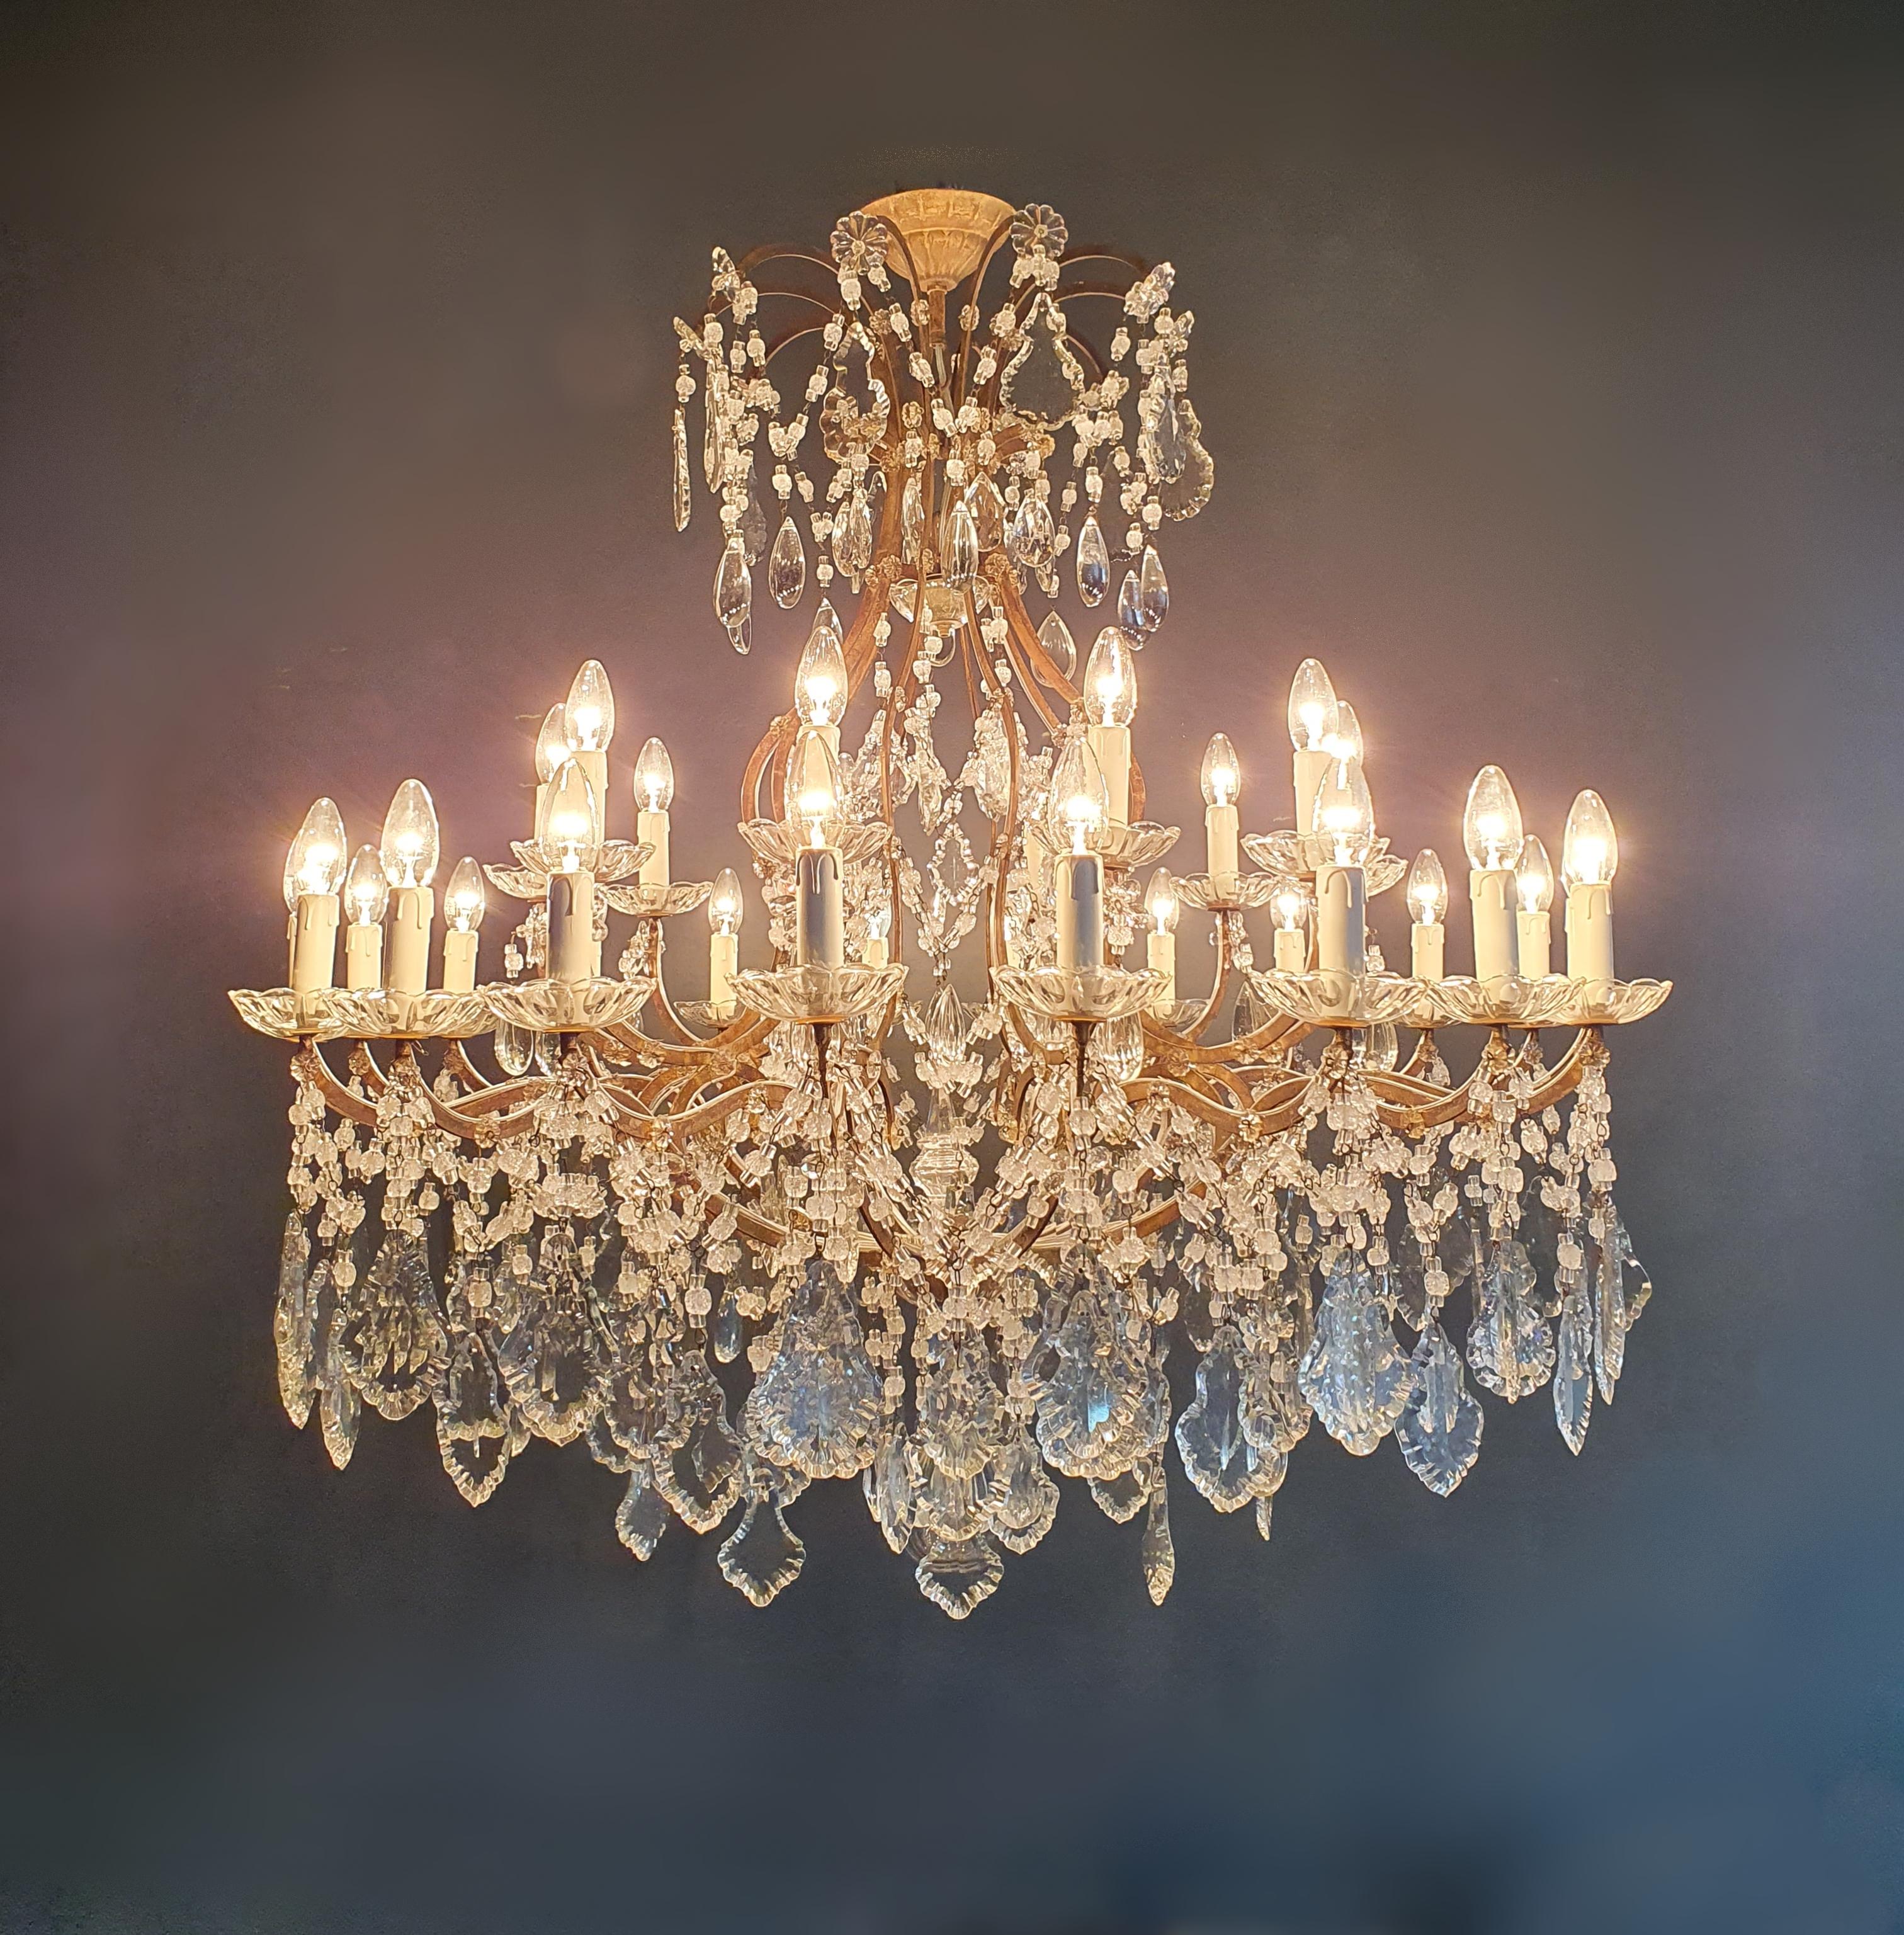 Wire Huge Candelabrum Crystal Antique Chandelier Classic traditional Massive Wide For Sale